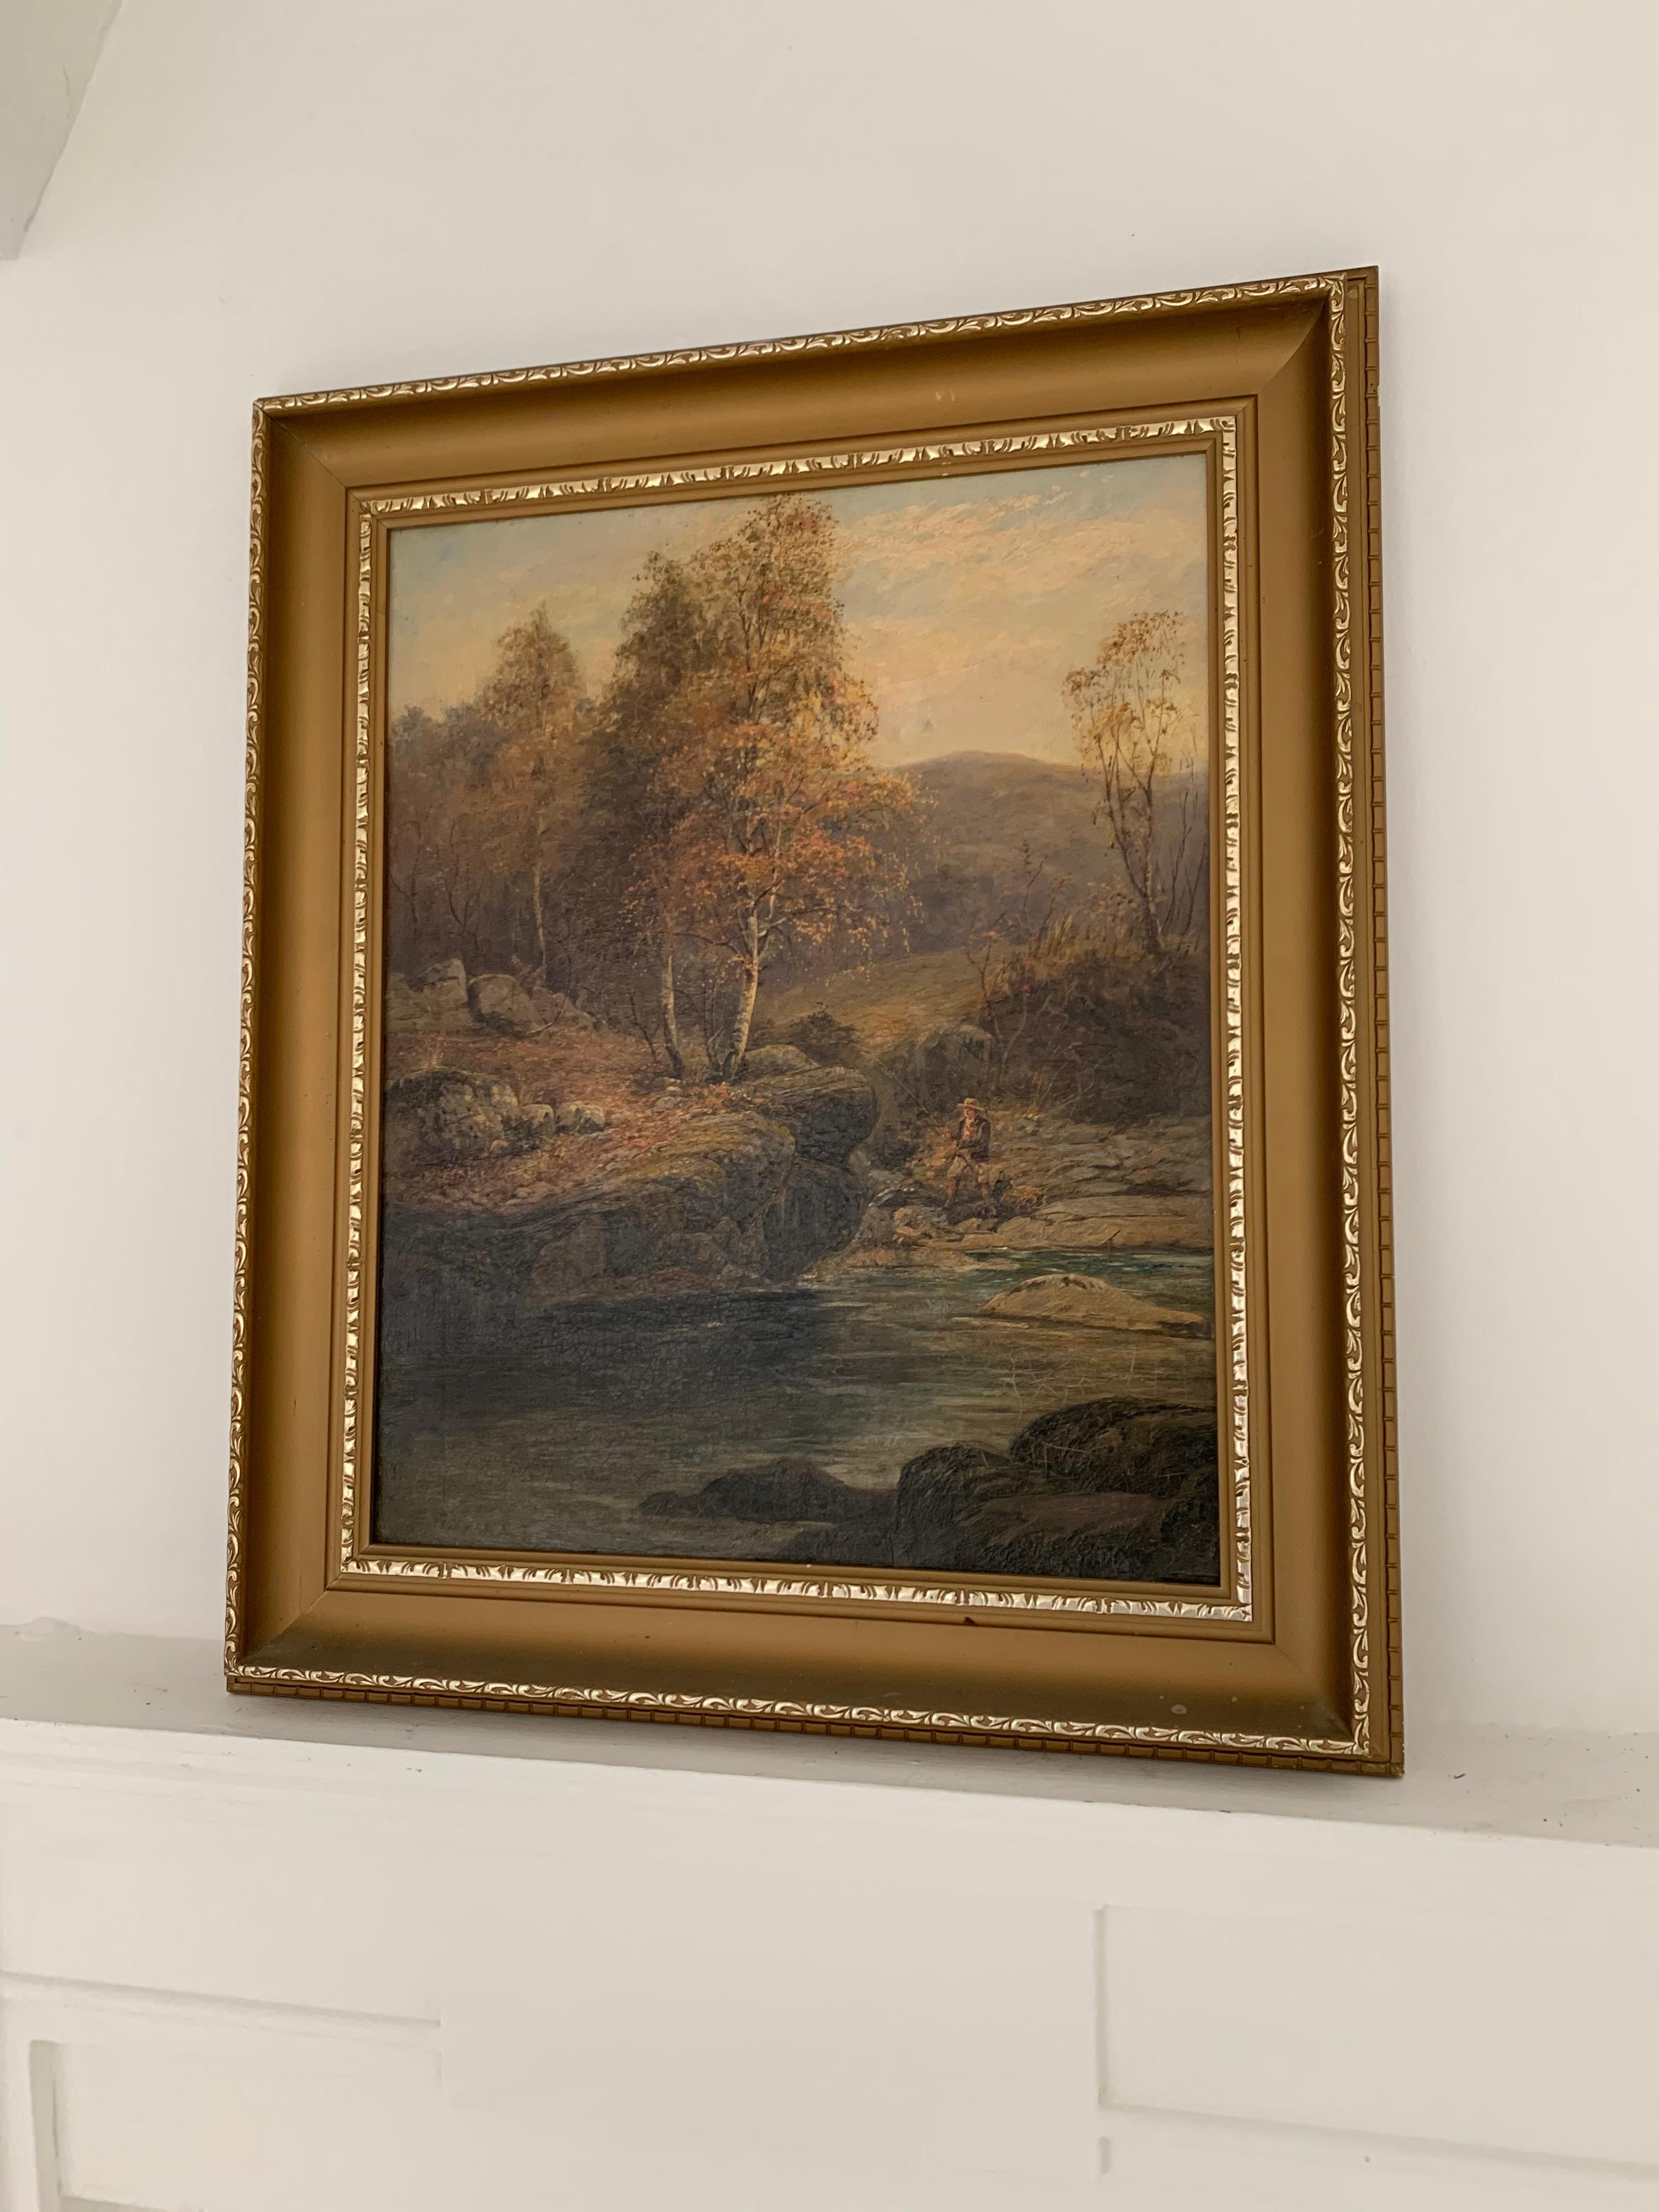 FINE VICTORIAN SIGNED OIL PAINTING - ANGLER IN AUTUMNAL RIVER LANDSCAPE - Painting by E. Davies